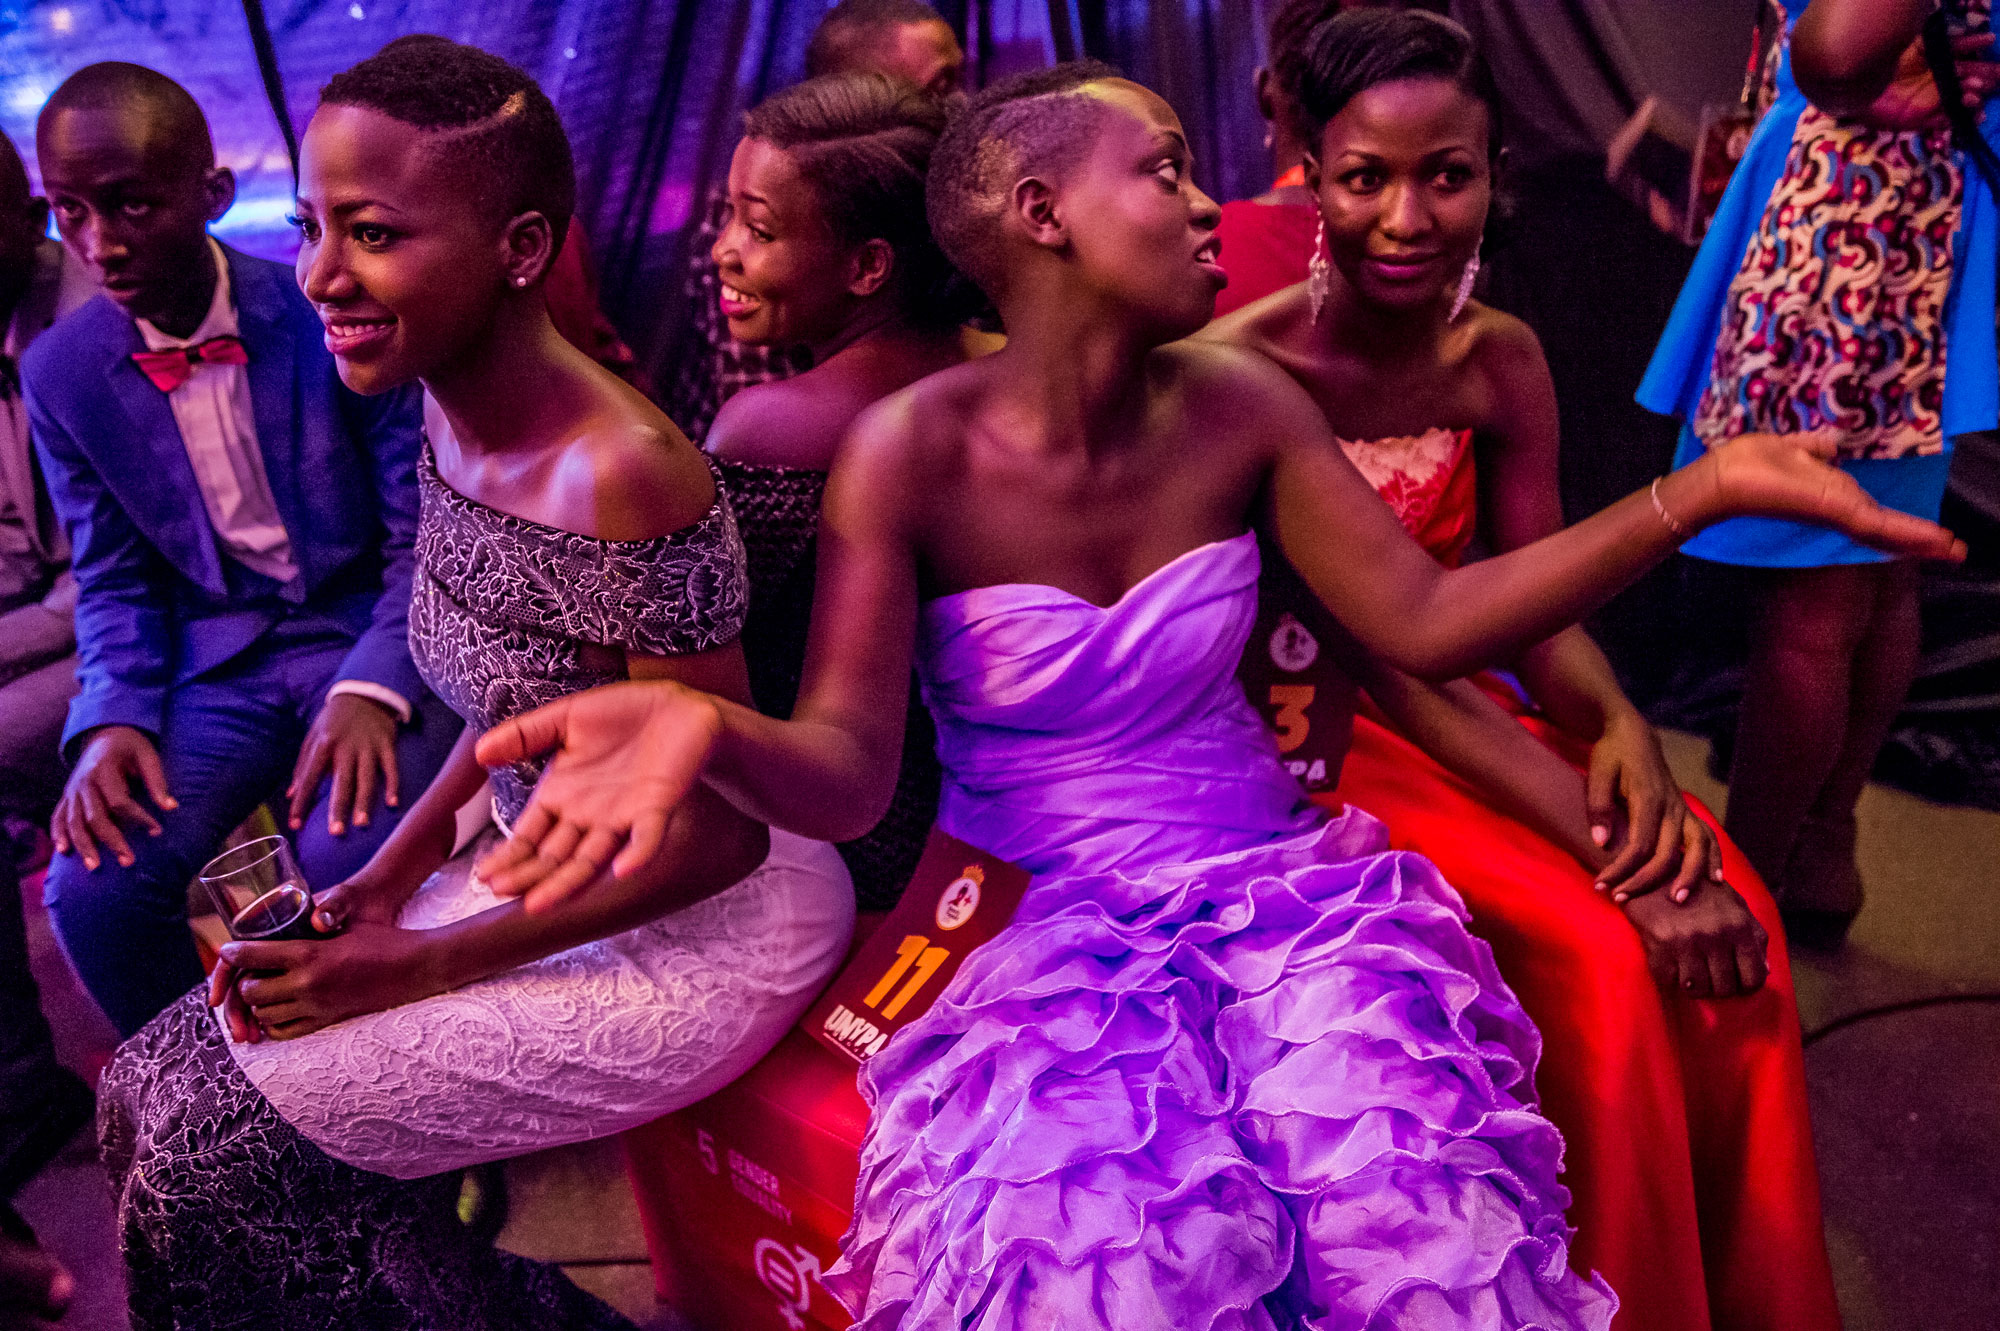 A group of contestants wait backstage at the Y+ Beauty Pageant, a contest developed for young people living with HIV in Uganda.